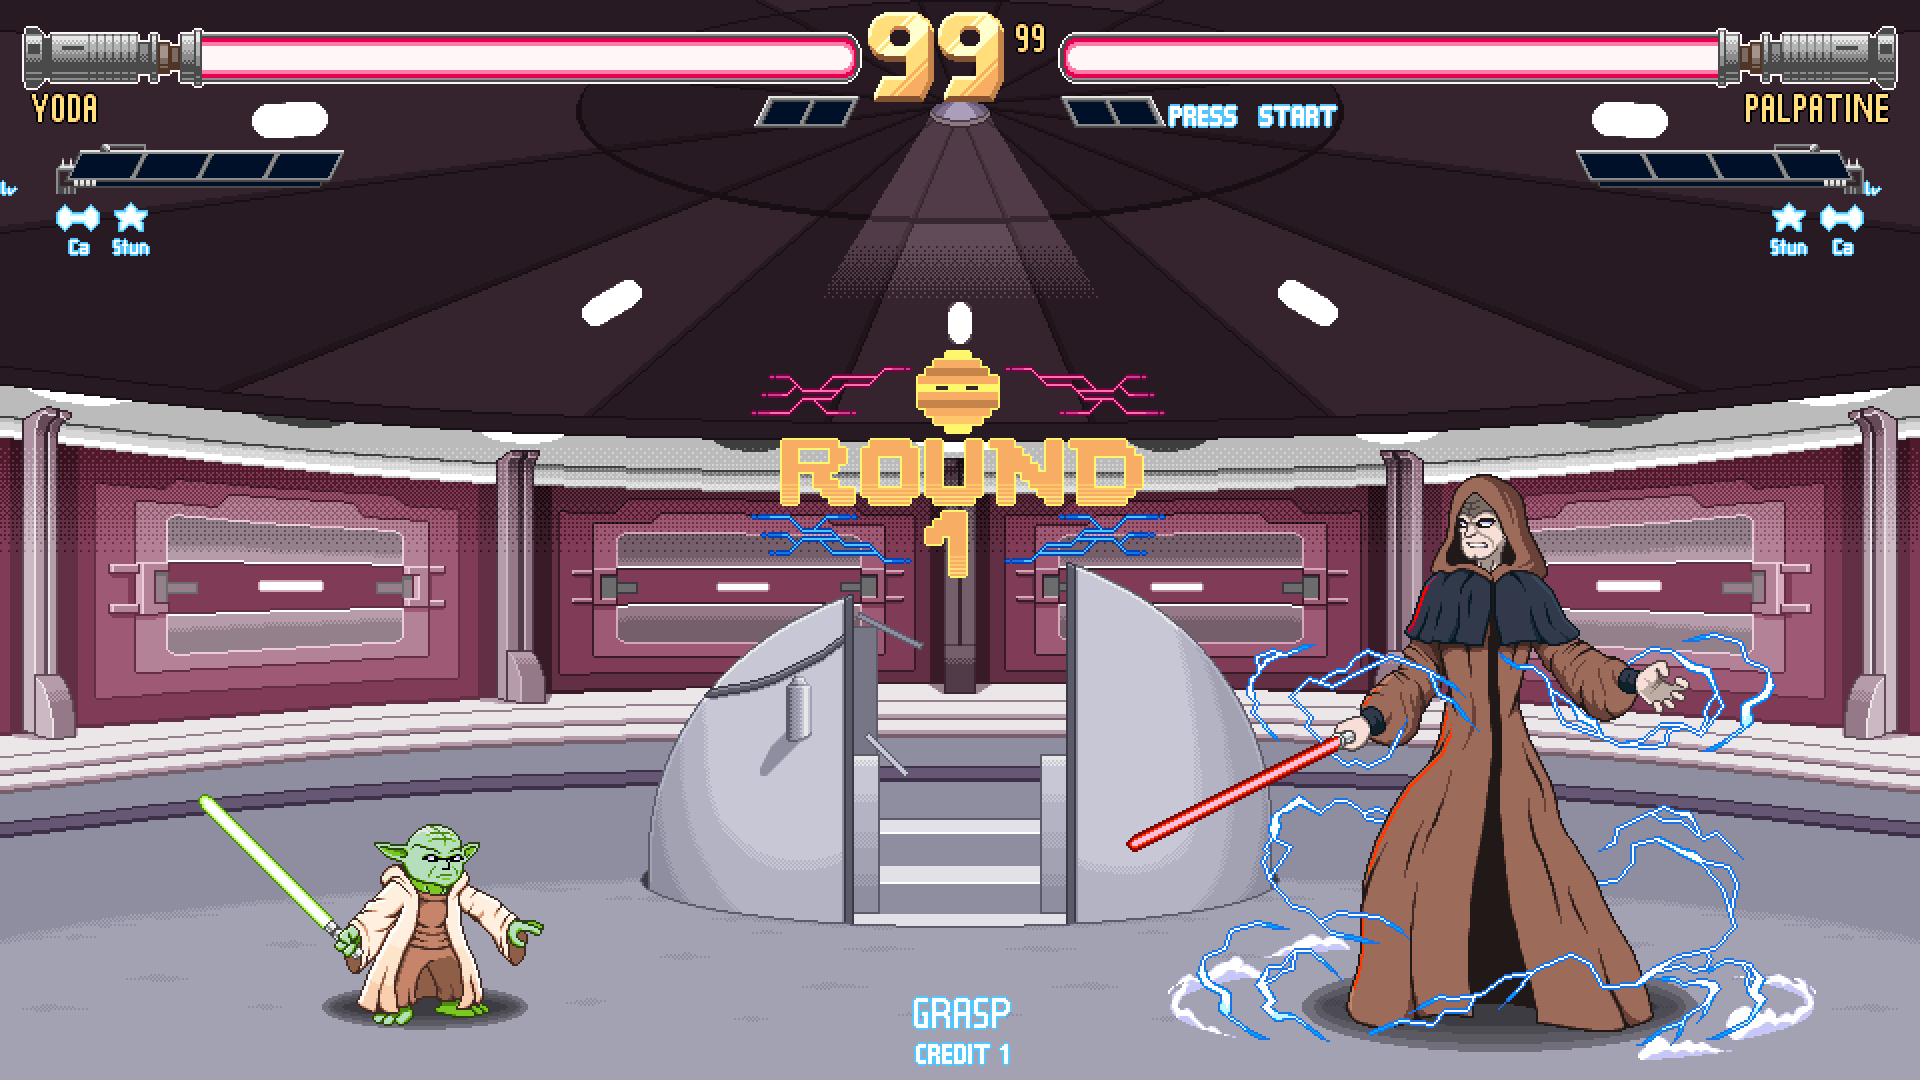 Battle in the Senate and video game lightsabers